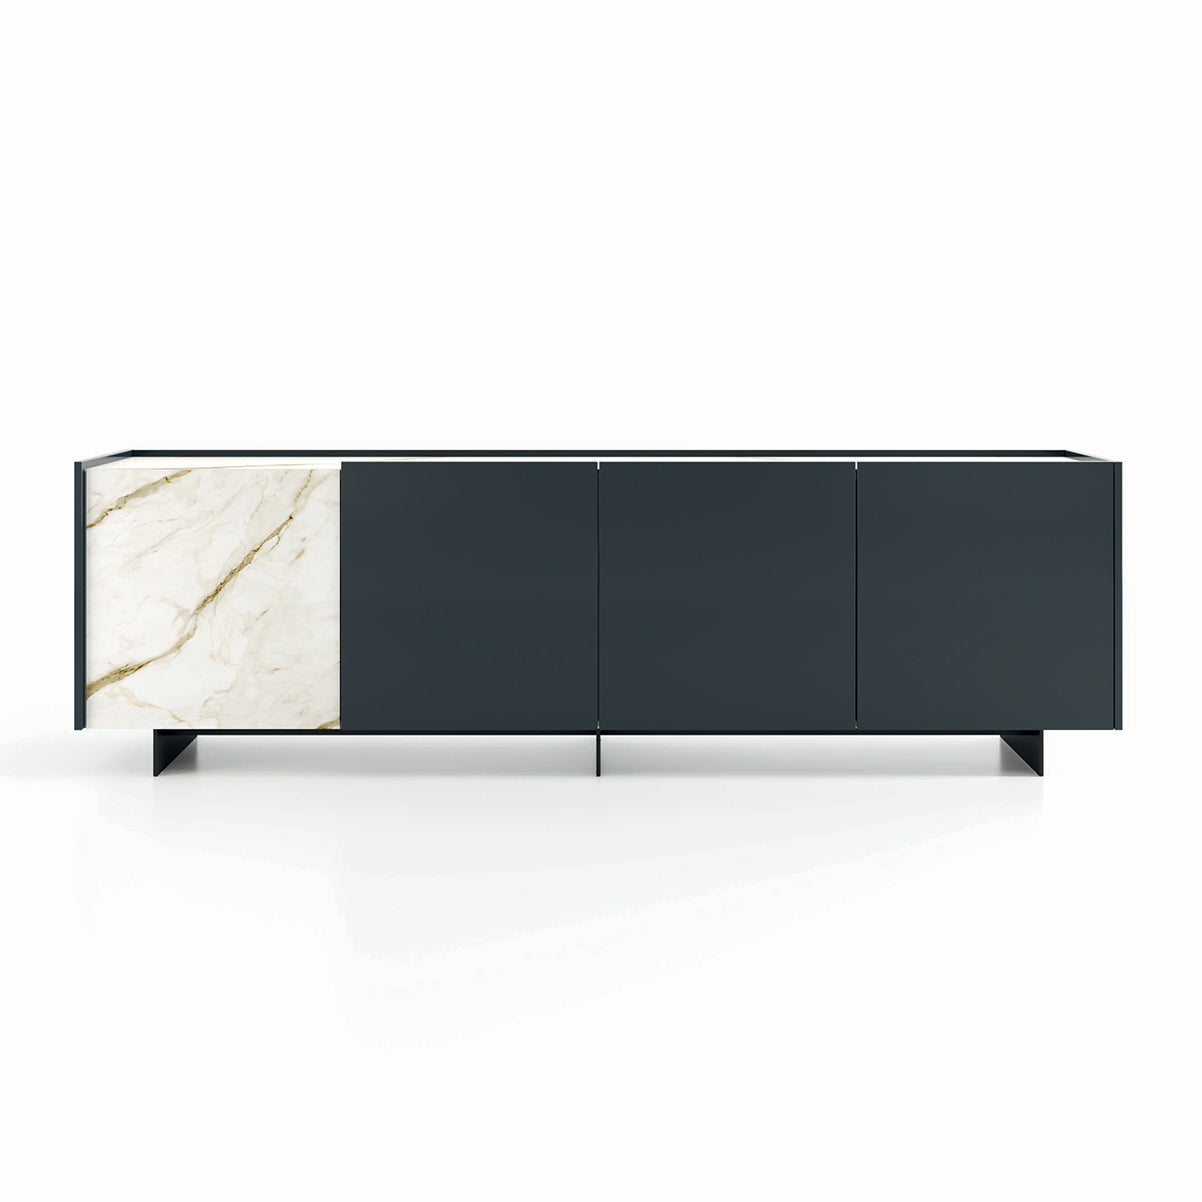 Wrap Sideboard with Ceramic Door by Dall'Agnese